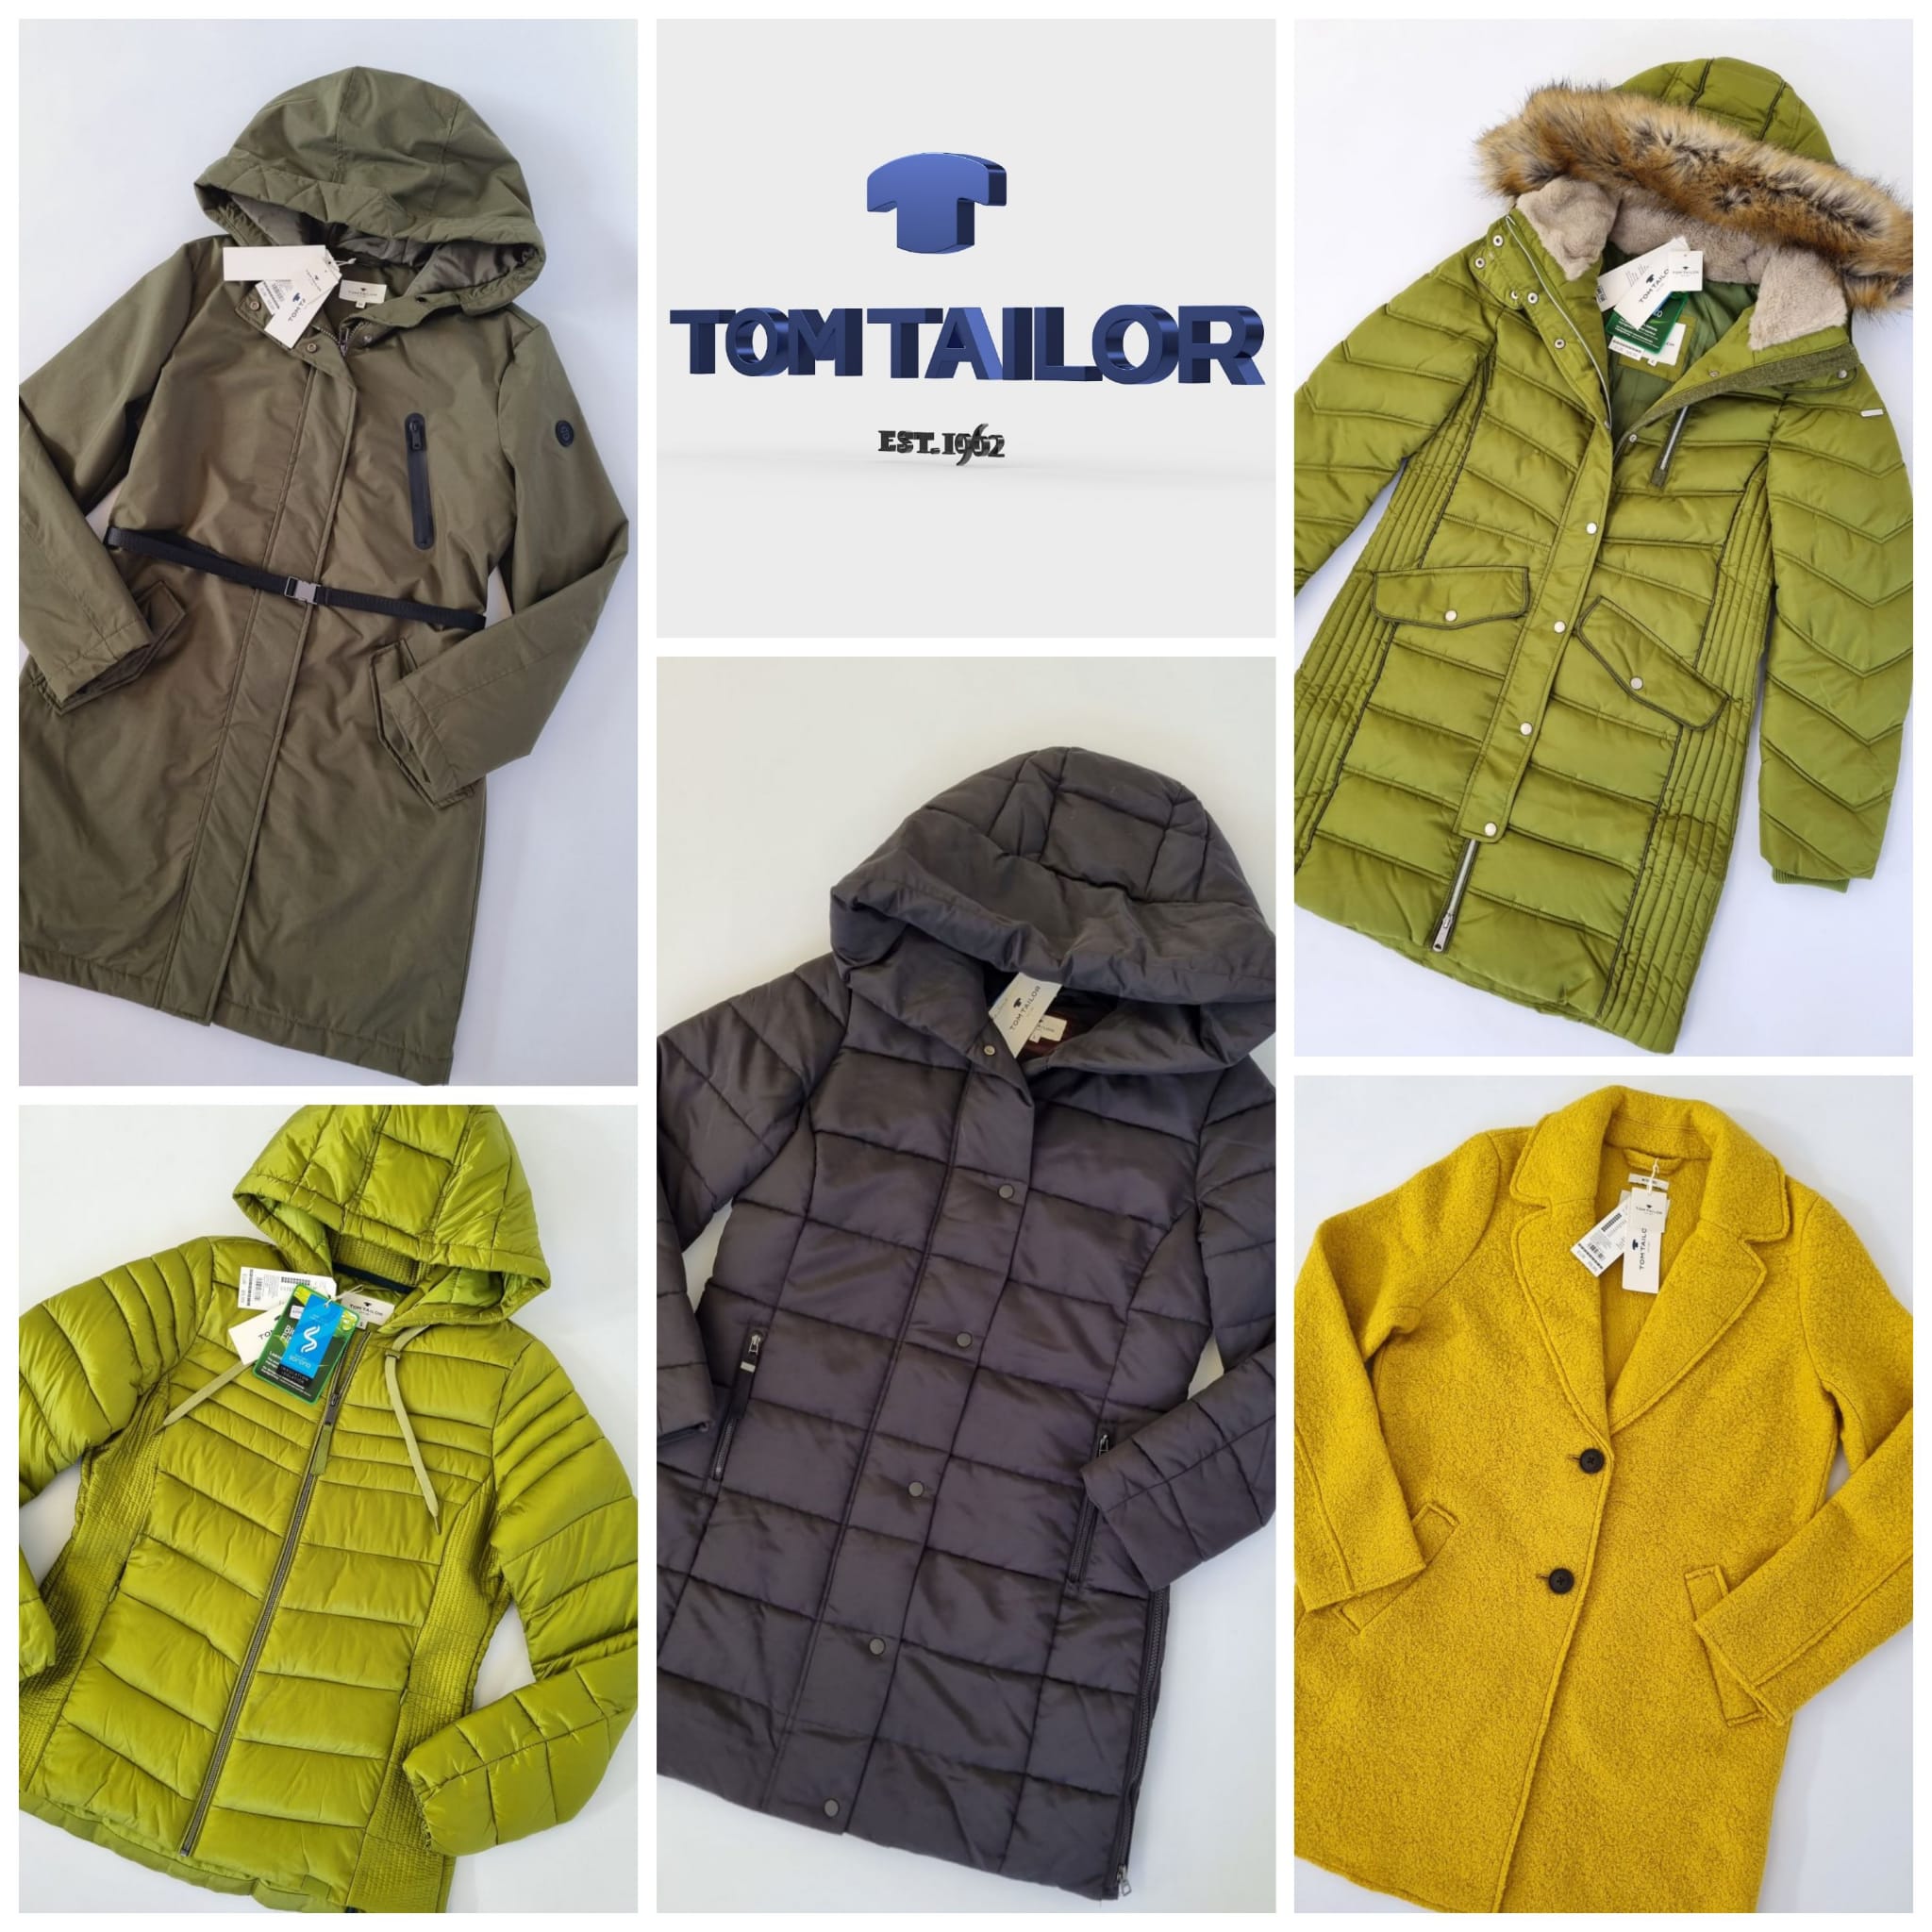 A mix of women's coats and jackets from Tom Tailor